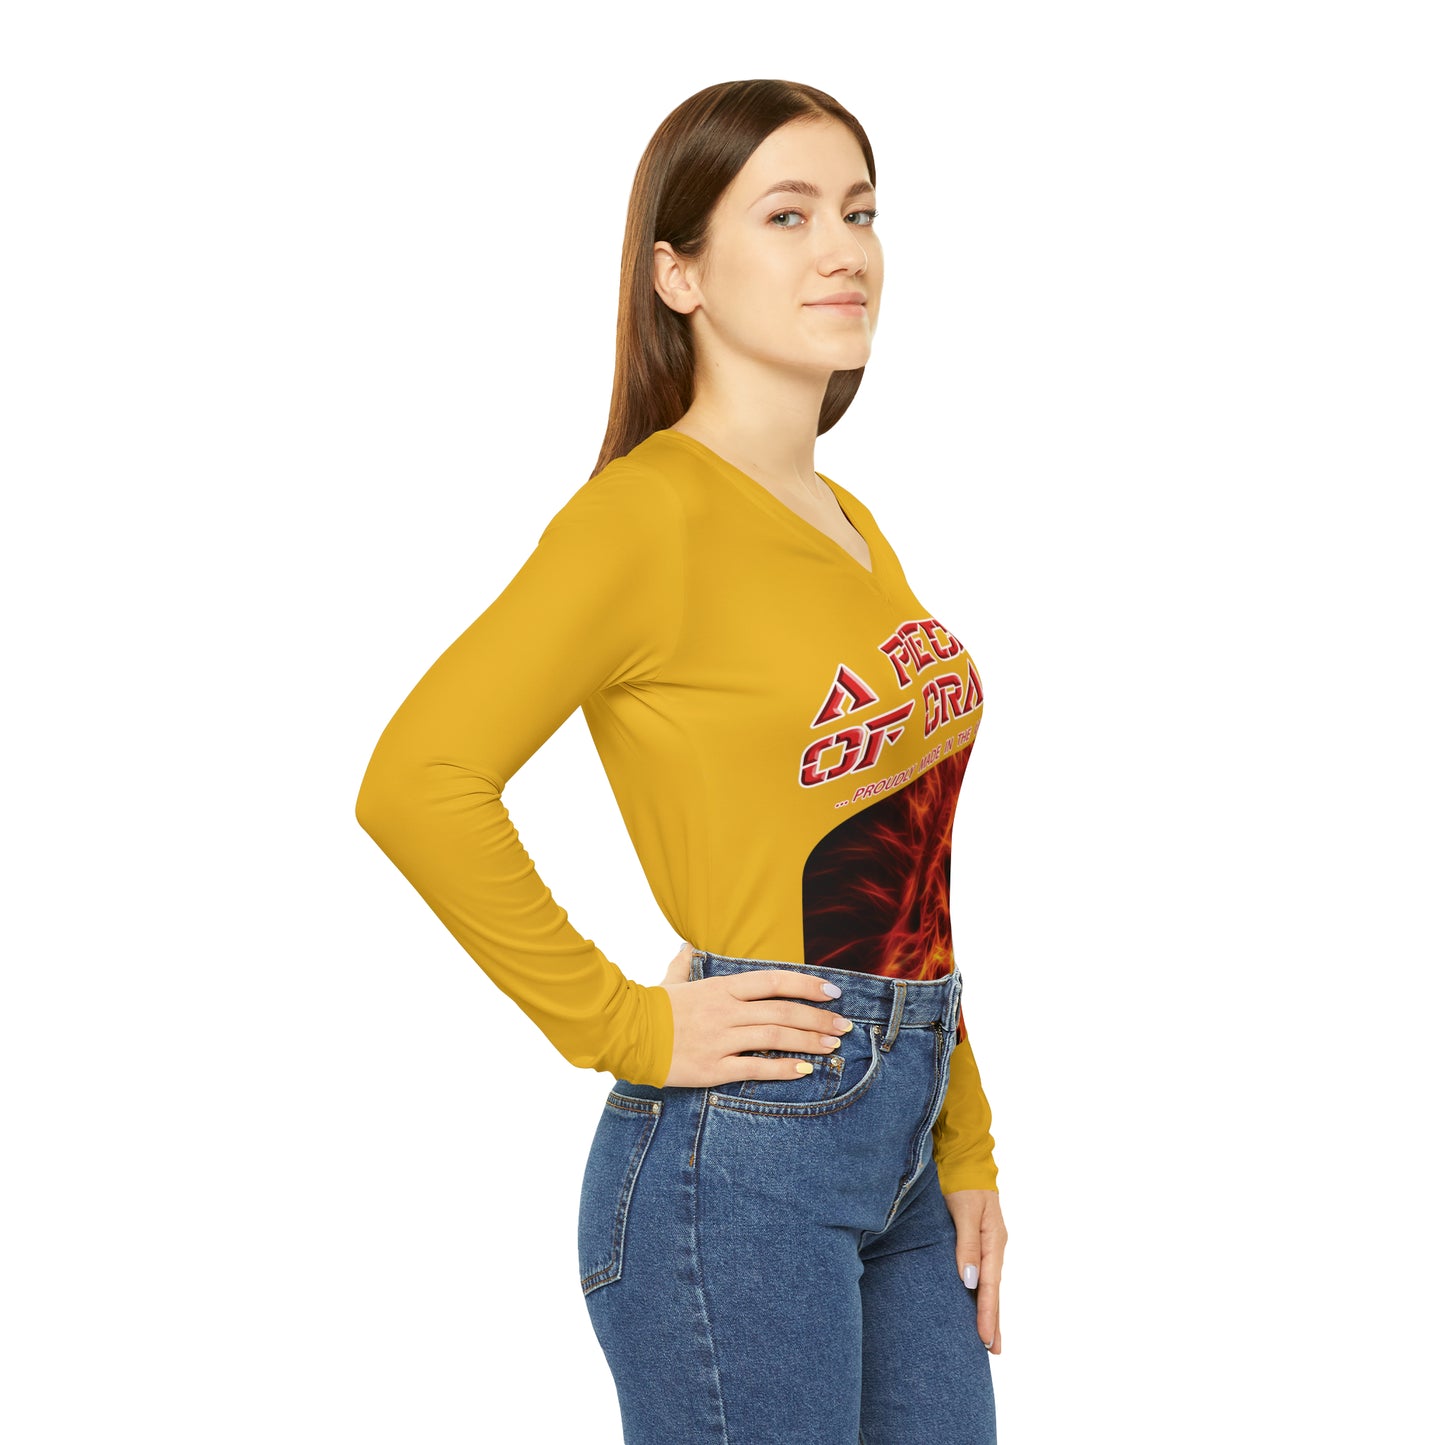 A Piece Of Crap Chic Long Sleeve V-Neck Tee - Yellow